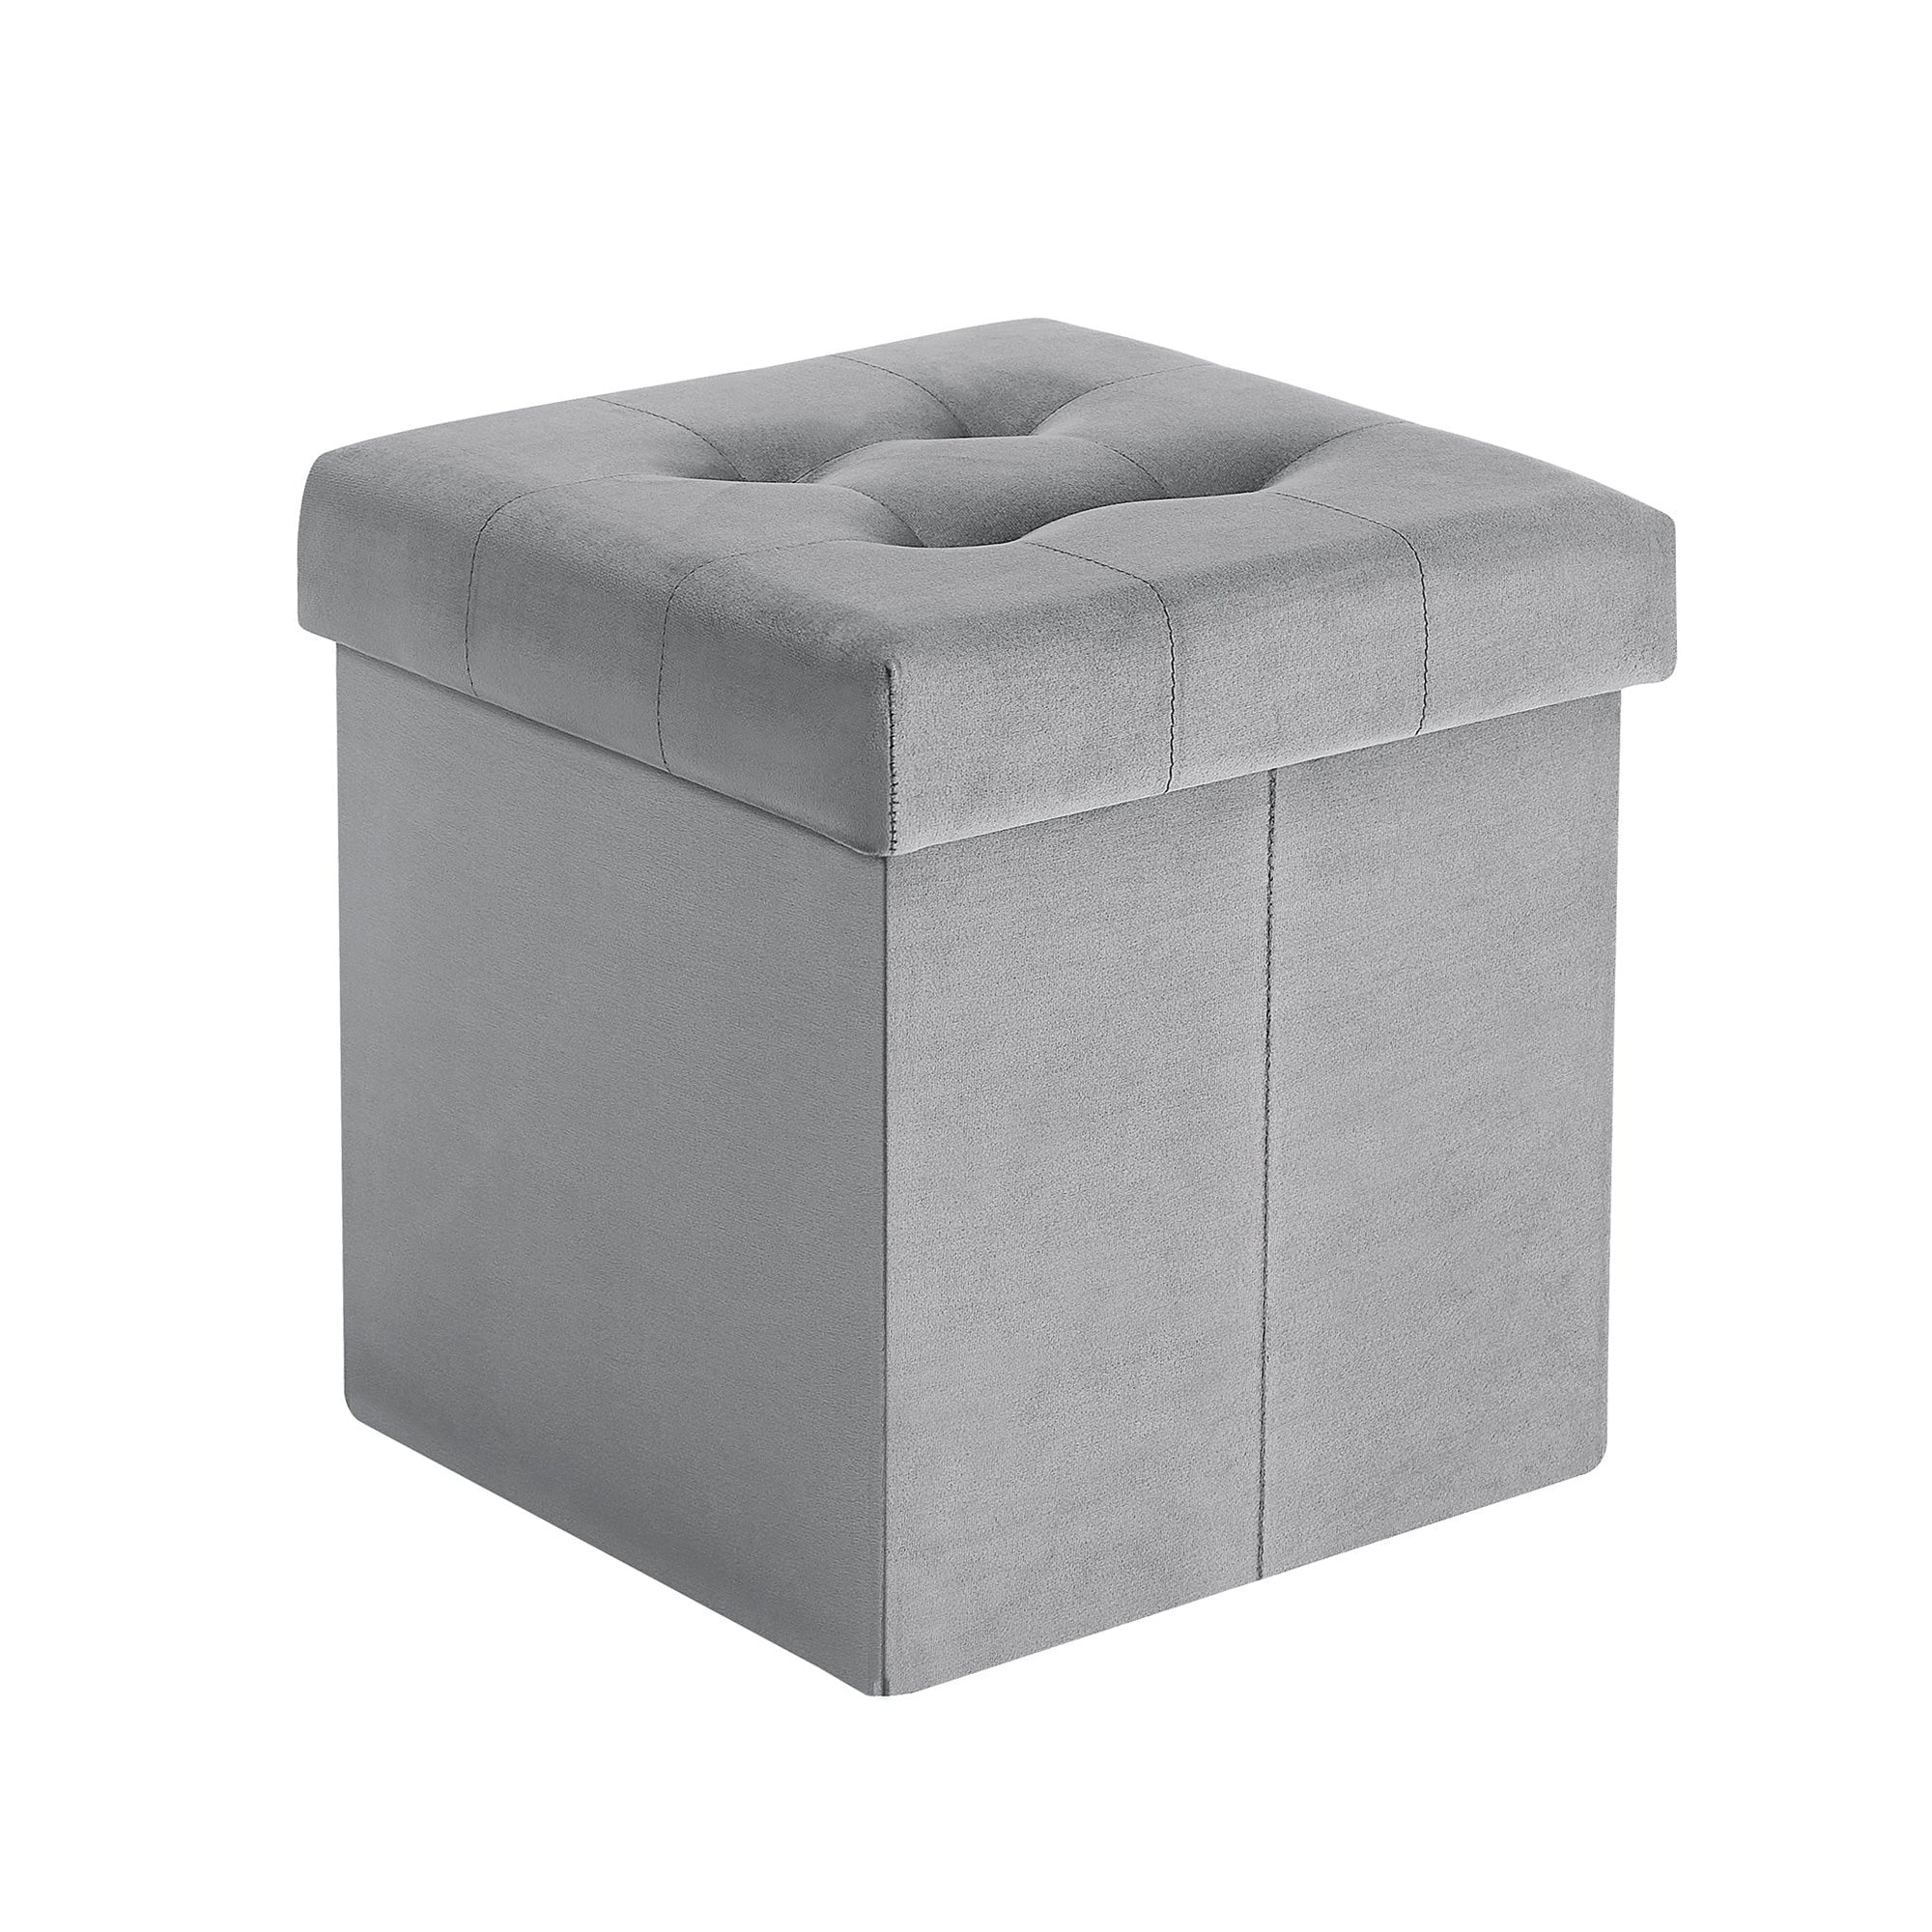 https://ak1.ostkcdn.com/images/products/is/images/direct/353257d704ea7f812d310062b128ca7670a992a0/VECELO-Modern-Folding-Tufted-Square-Storage-Ottoman-Foot-Rest.jpg